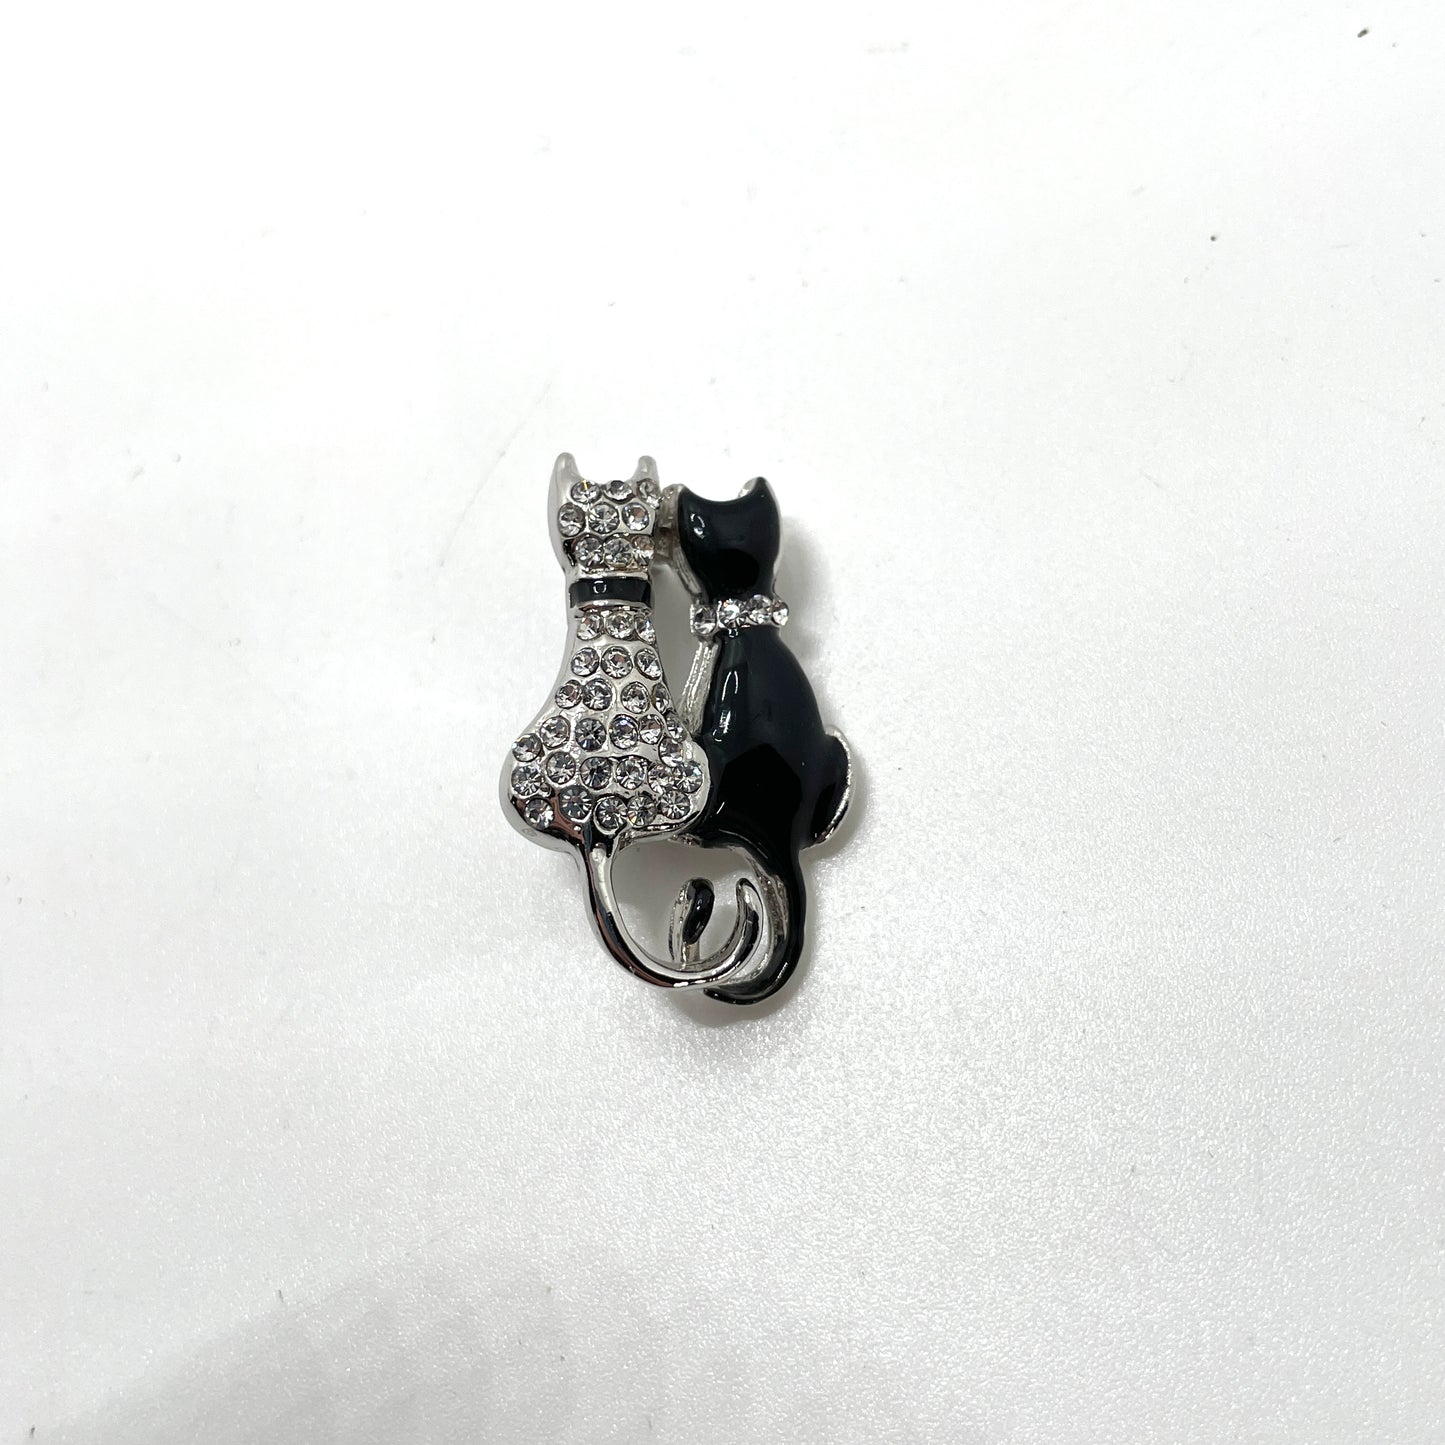 Vintage Cats with Crystal Accents Pin